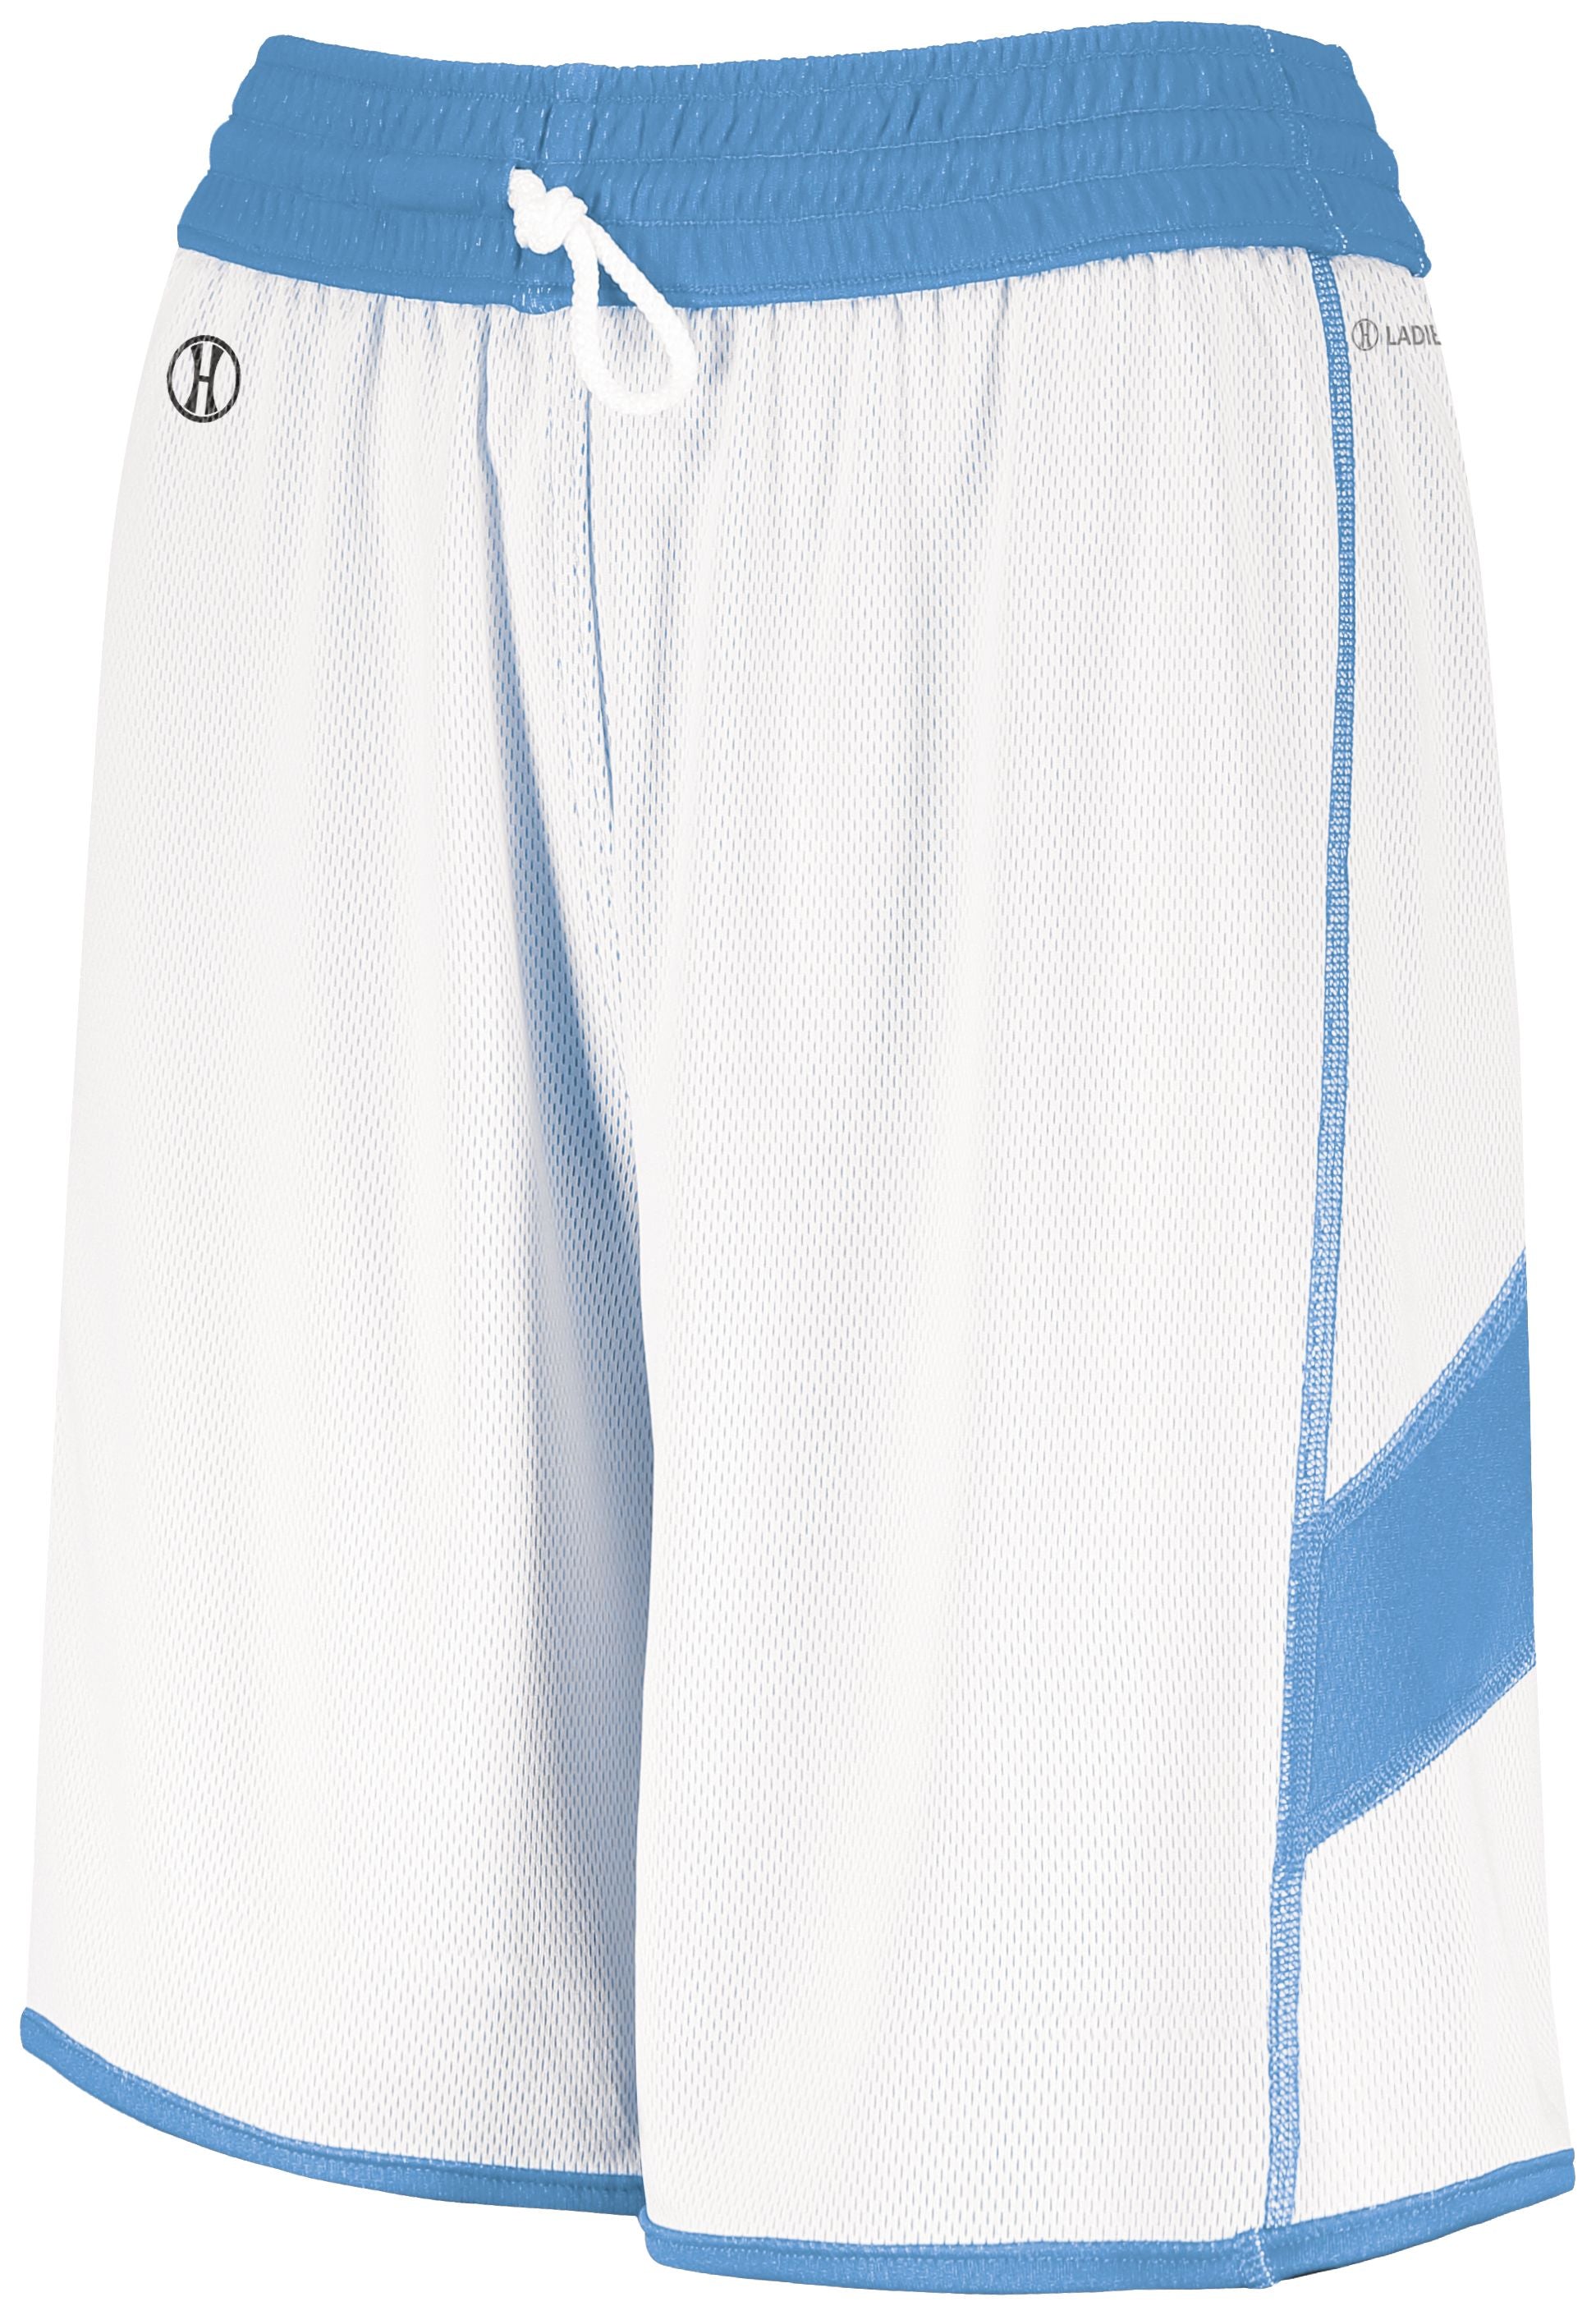 Holloway Ladies Dual-Side Single Ply Shorts in University Blue/White  -Part of the Ladies, Ladies-Shorts, Basketball, Holloway, All-Sports, All-Sports-1 product lines at KanaleyCreations.com